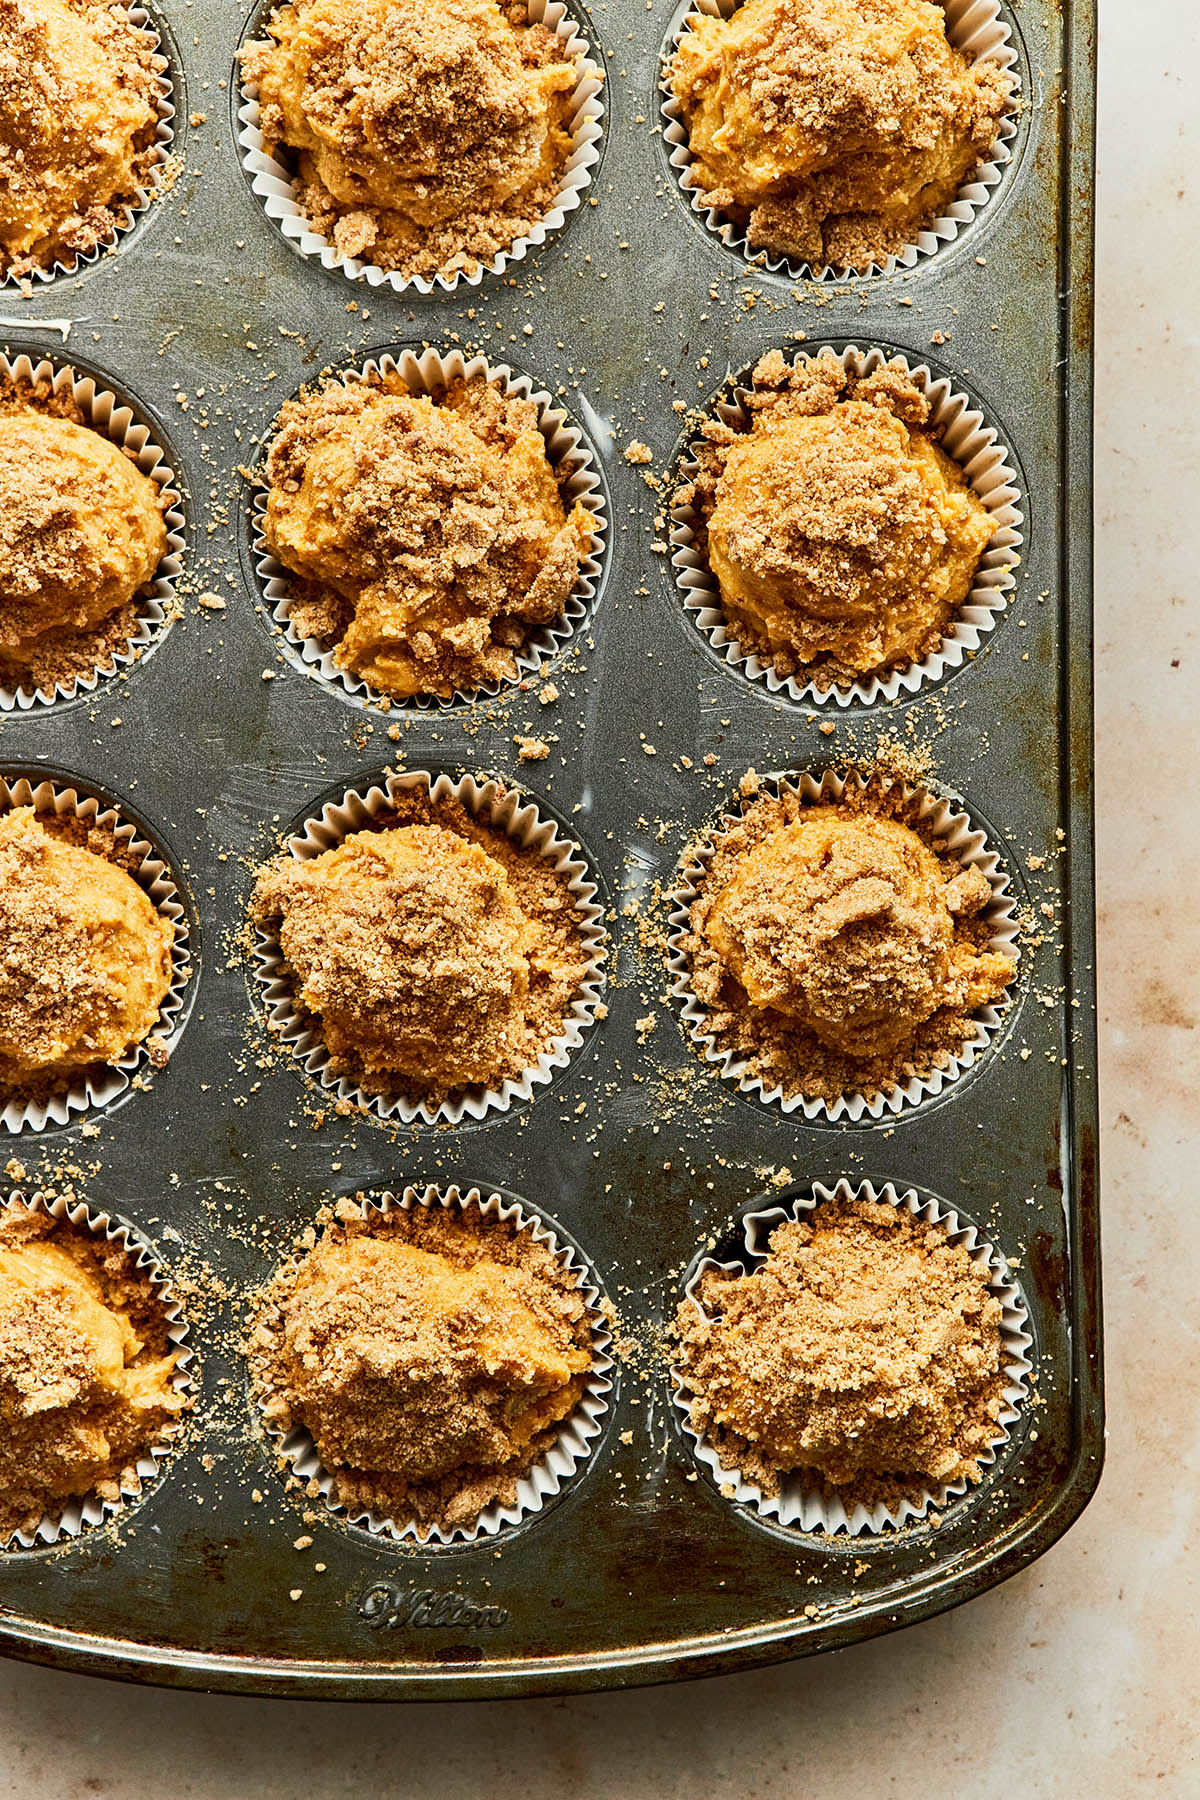 unbaked muffin batter, topped with streusel, in a muffin tin.